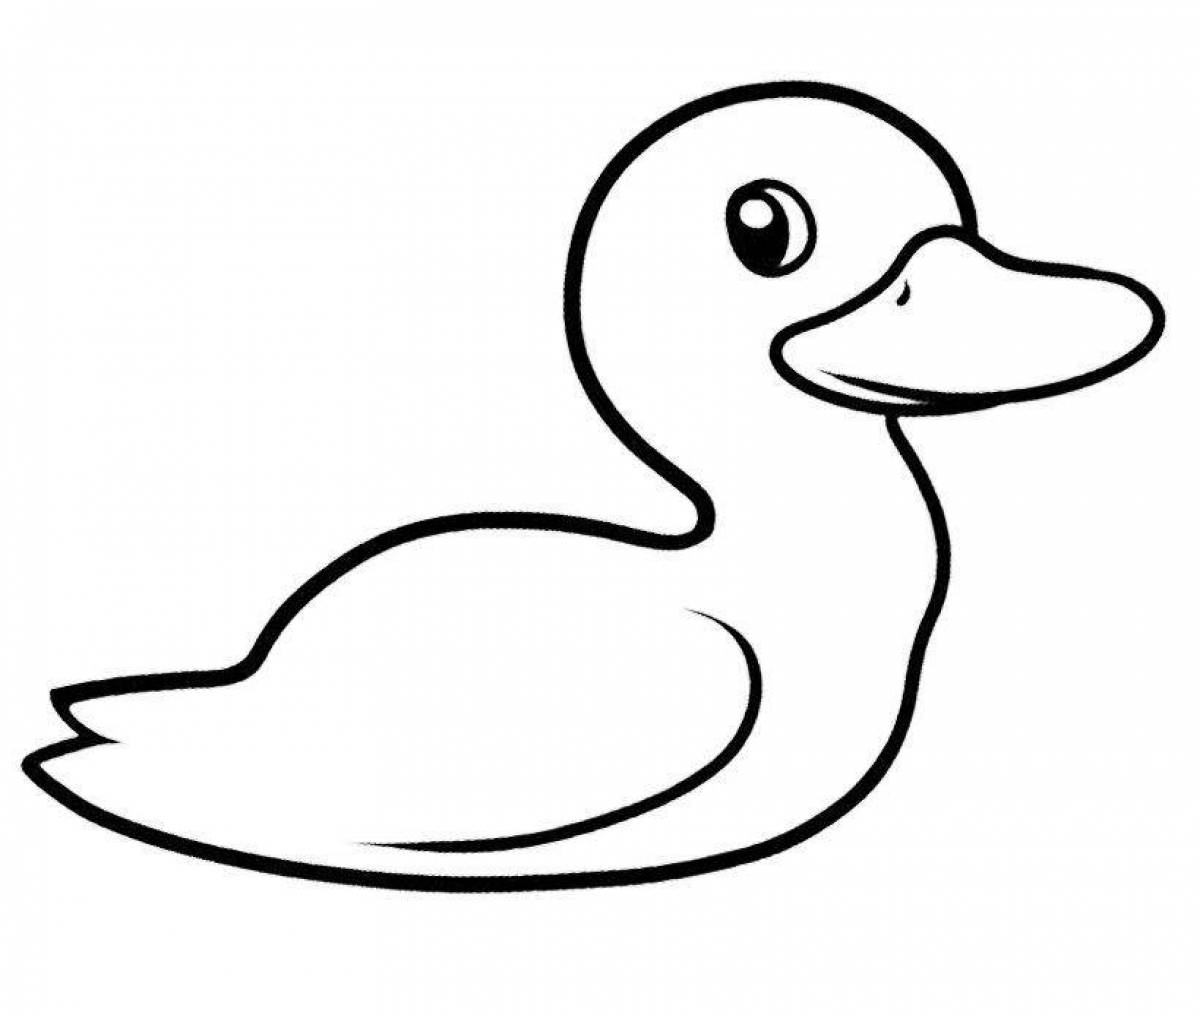 Lalafanfan duck coloring page animated